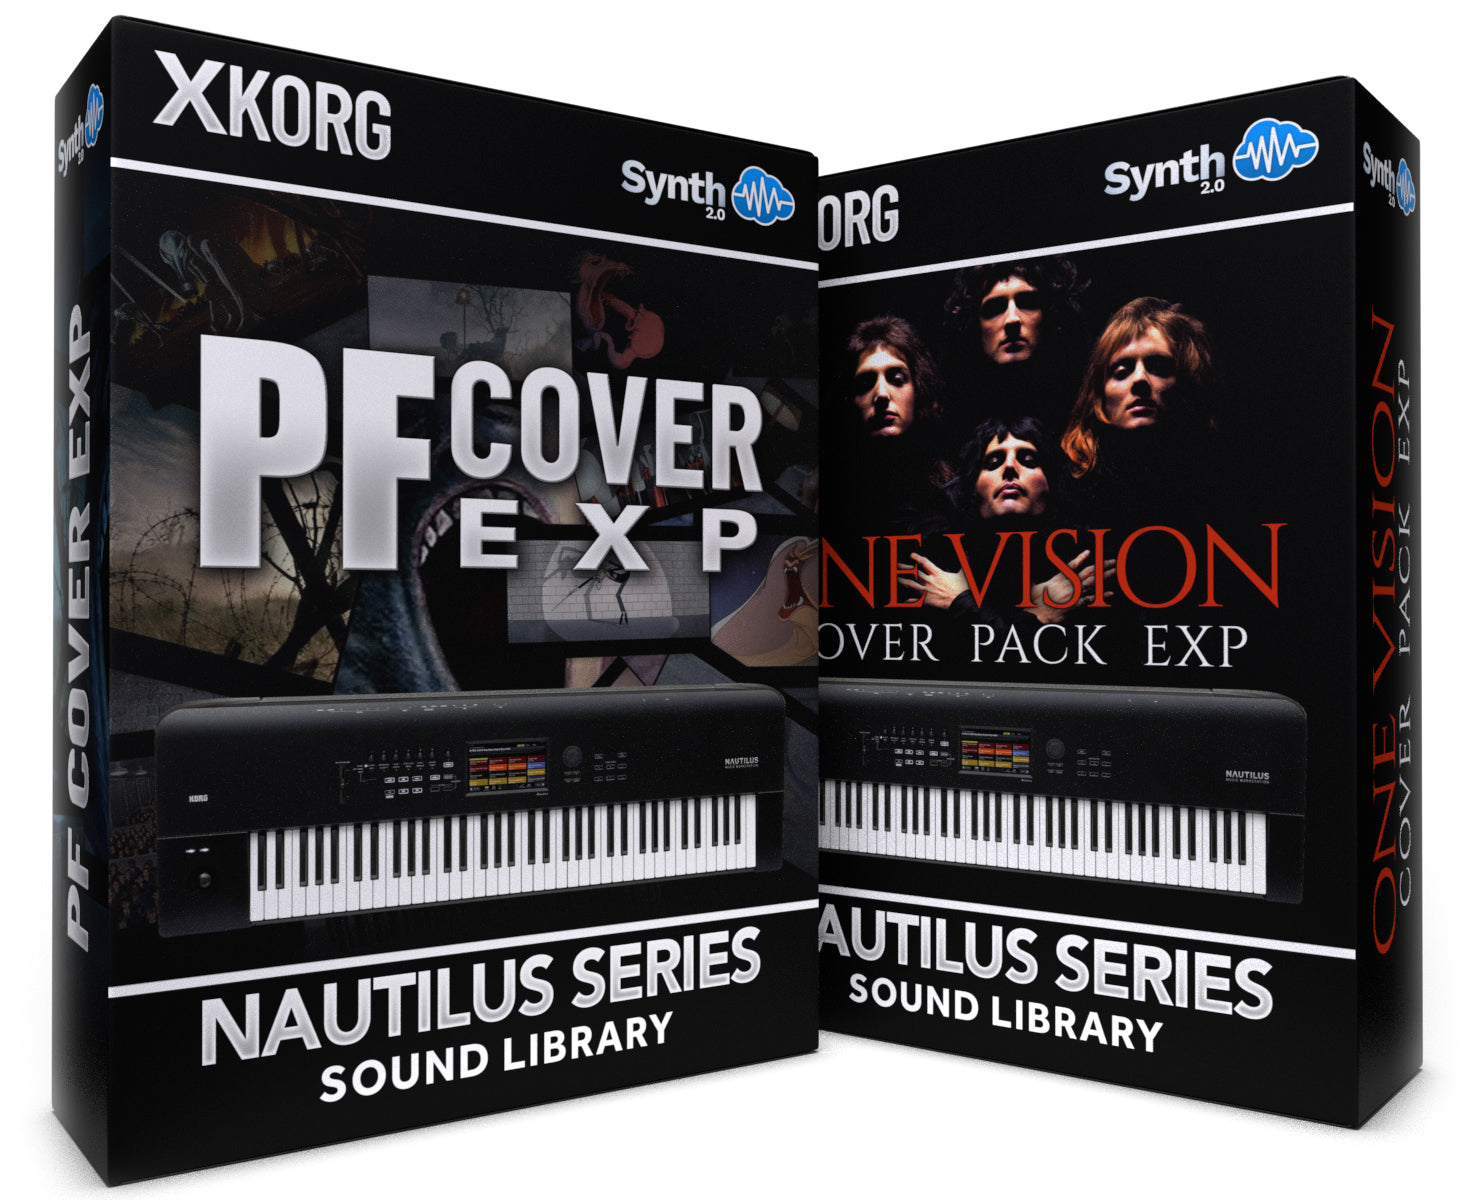 SCL183 - ( Bundle ) - PF Cover EXP + One Vision Cover EXP - Korg Nautilus Series